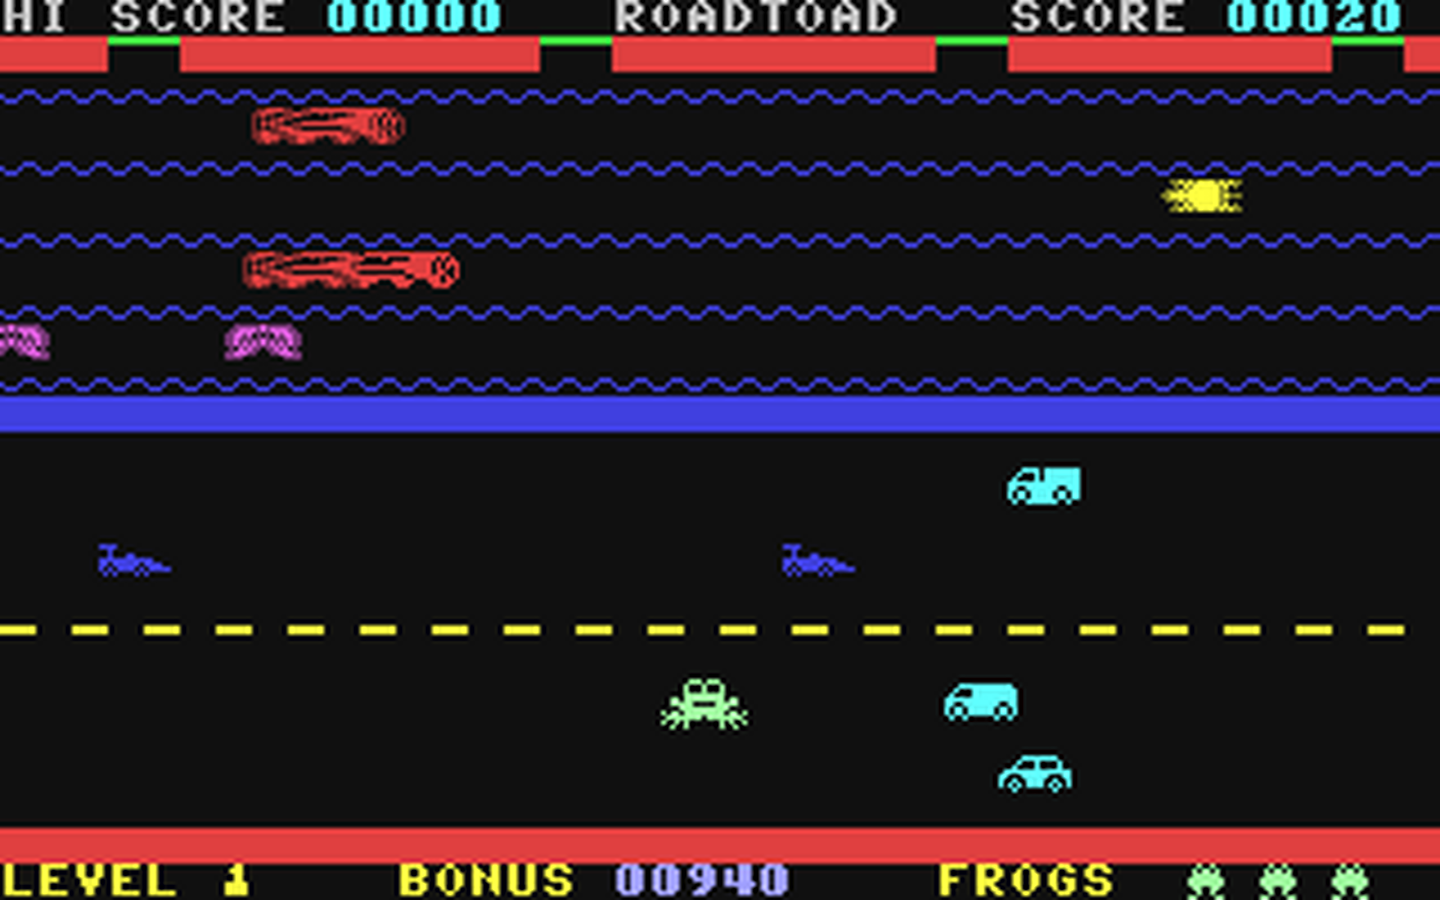 C64 GameBase Road_Toad CDS_(Commercial_Data_Systems_Ltd.) 1982